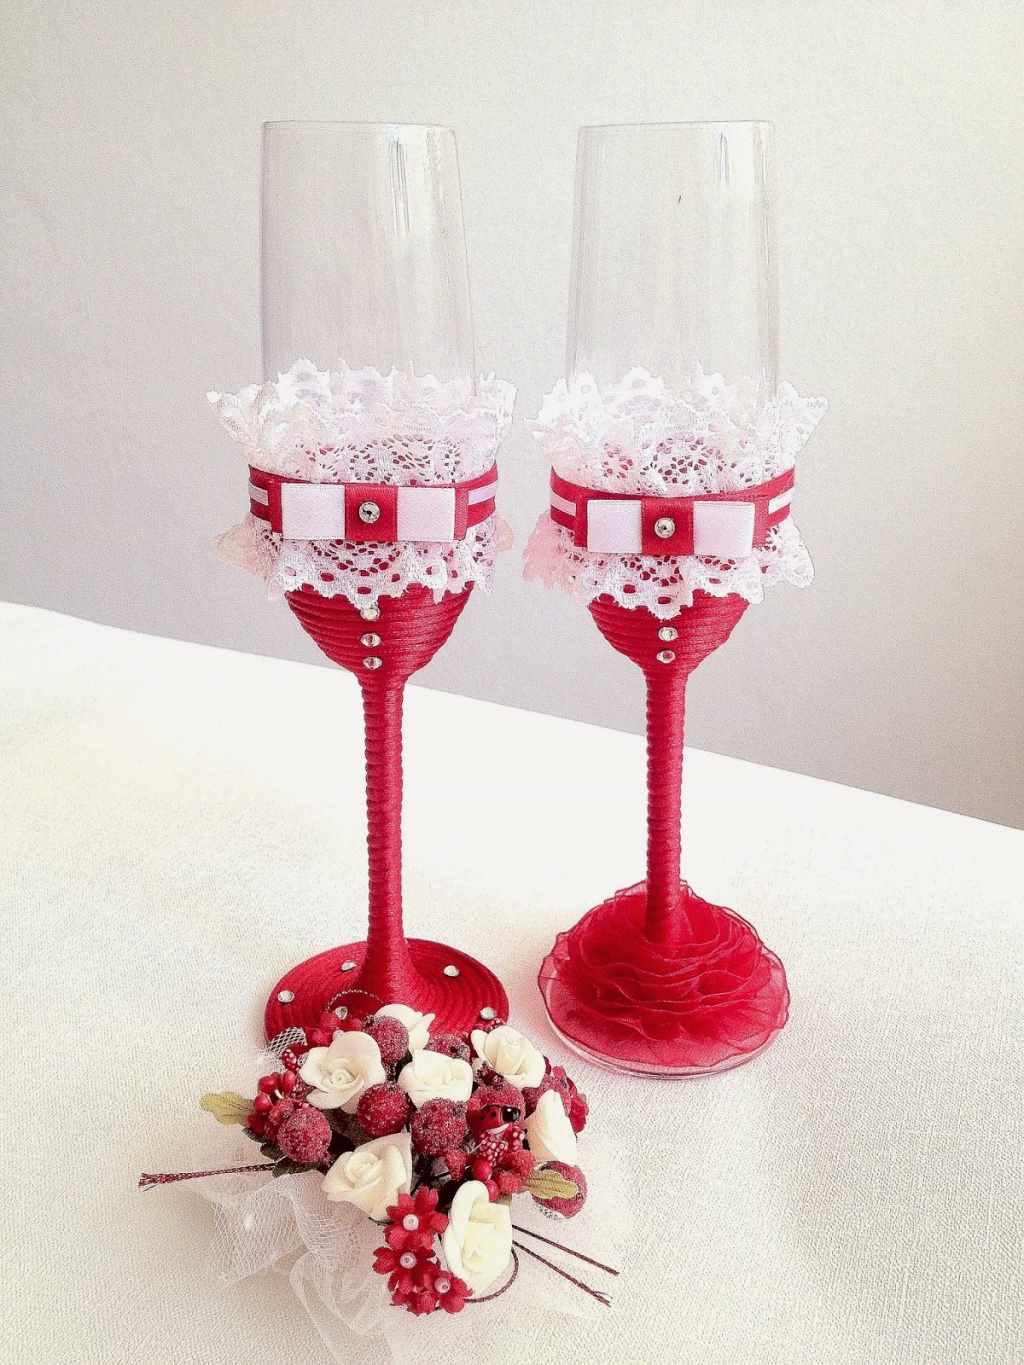 An example of unusual decoration of wedding glasses decor